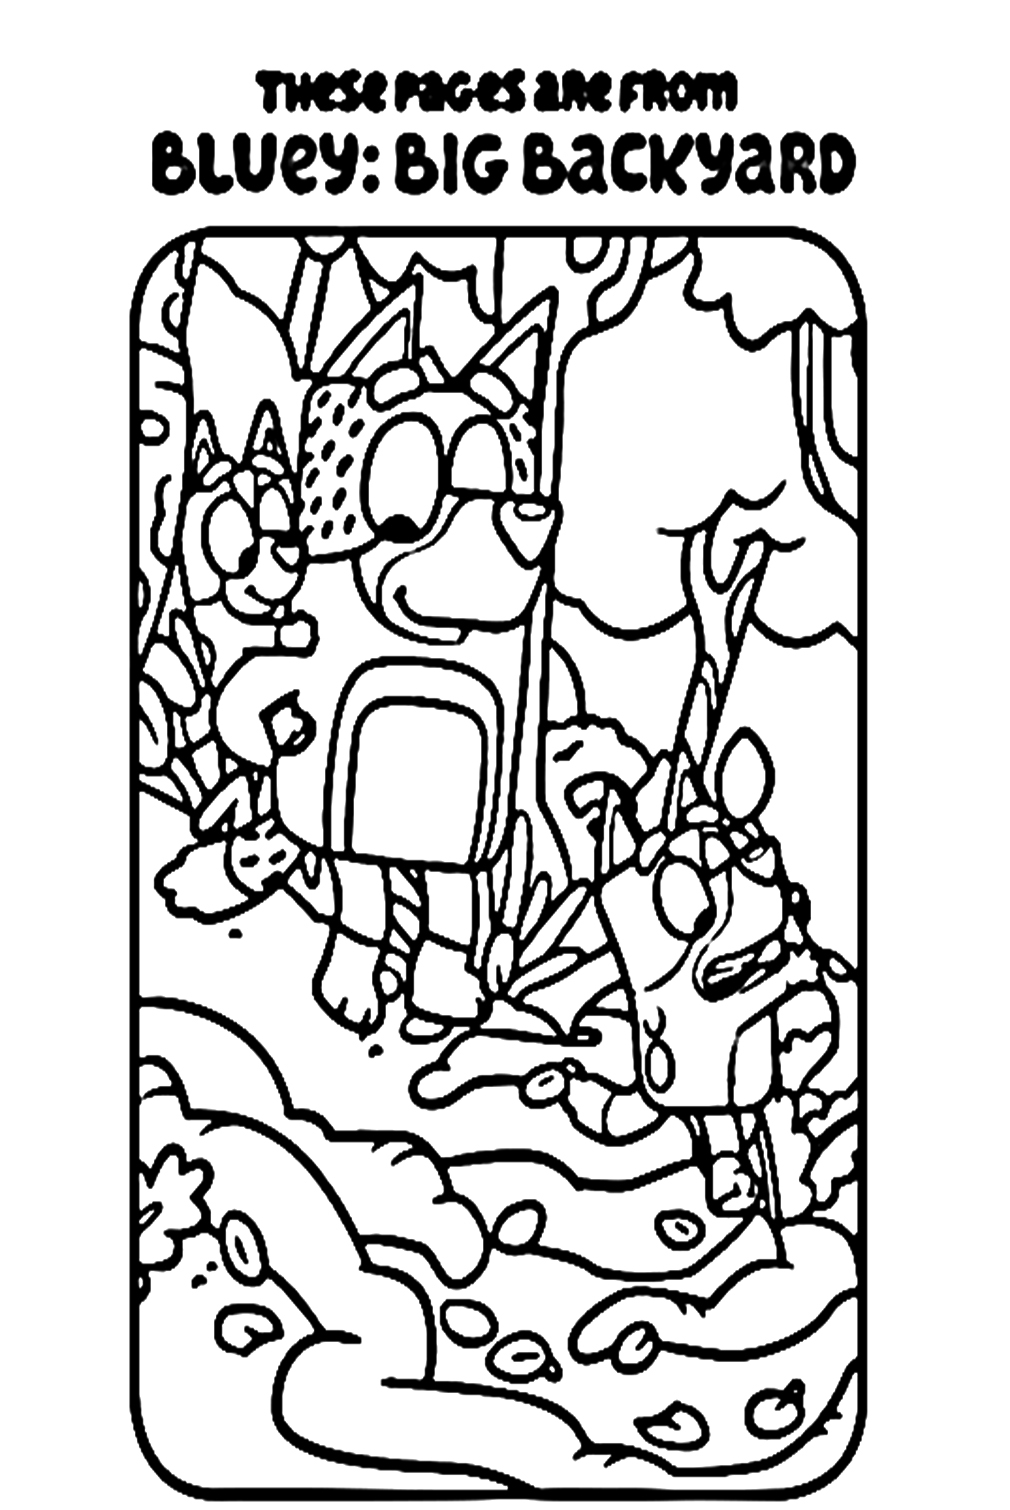 Bluey Car Coloring Pages